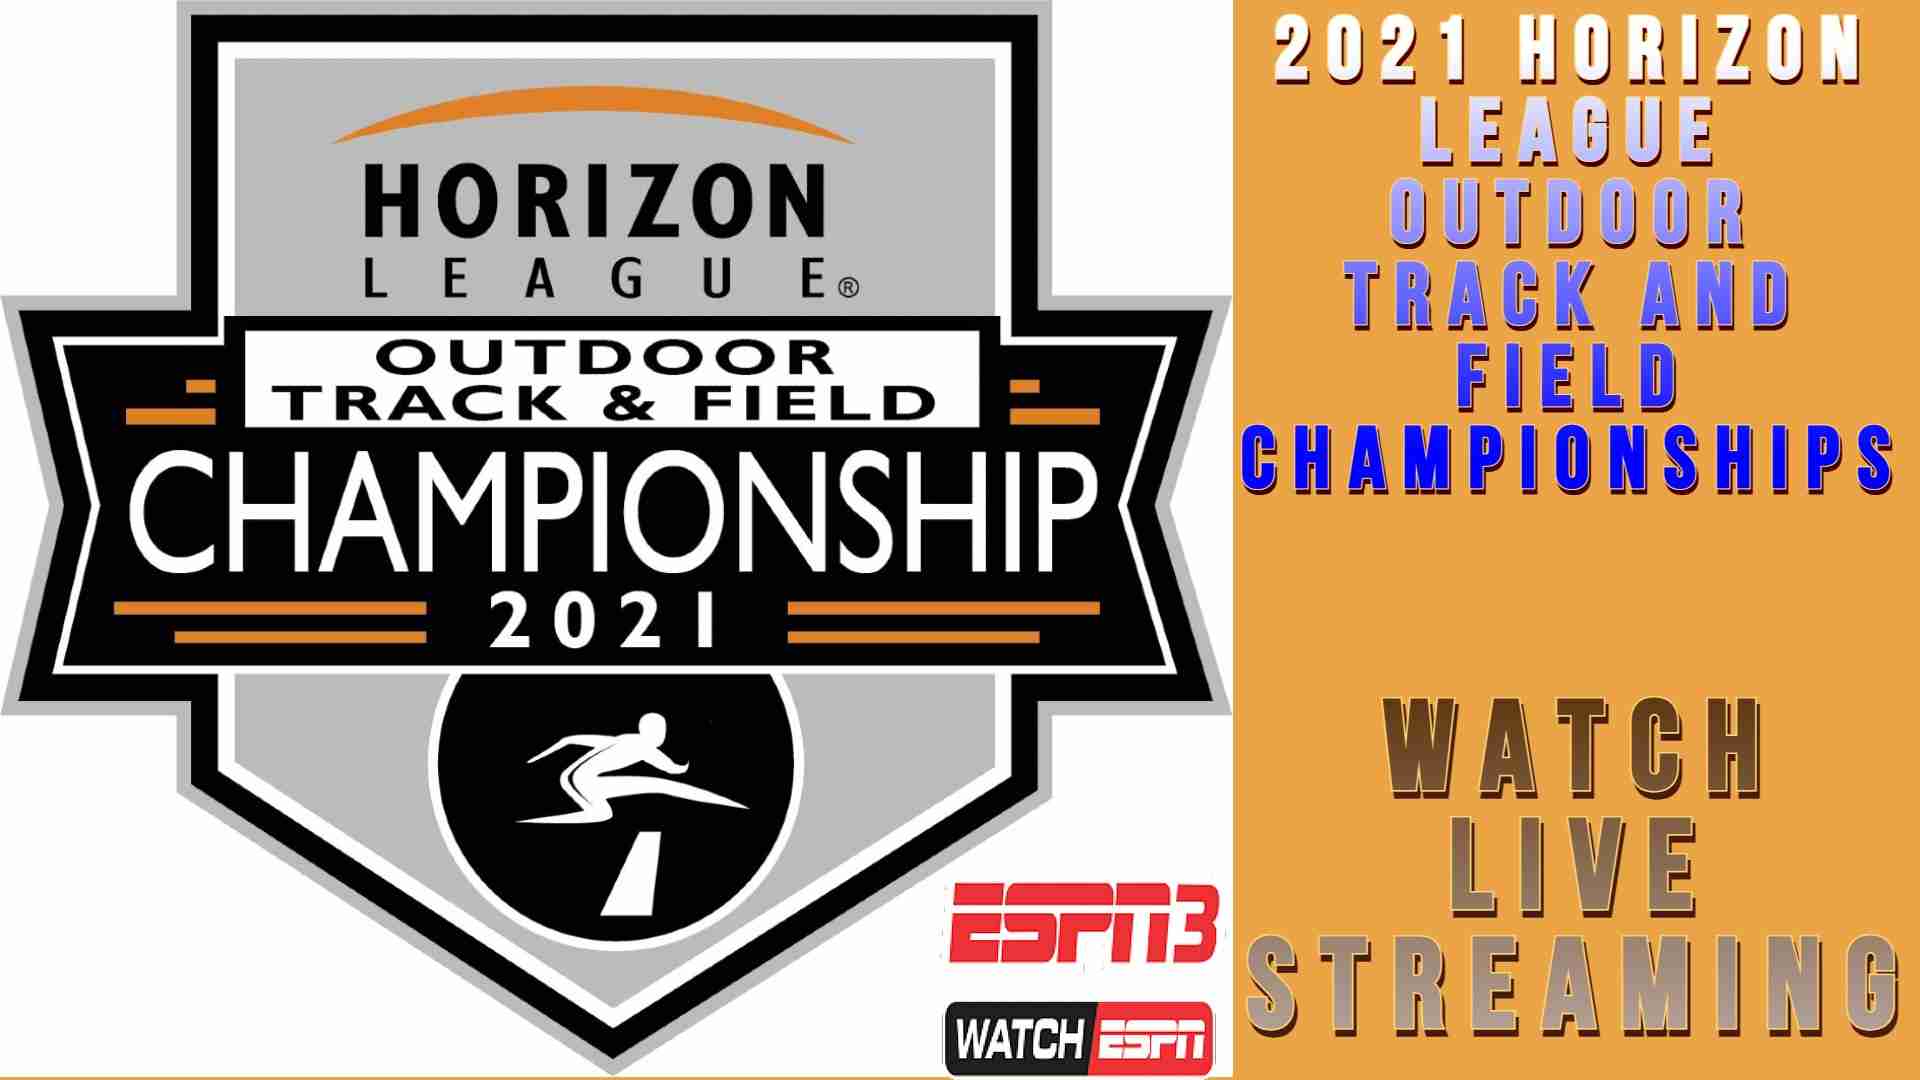 Watch_2021_Horizon_League_Outdoor_Track_and_Field_Championships